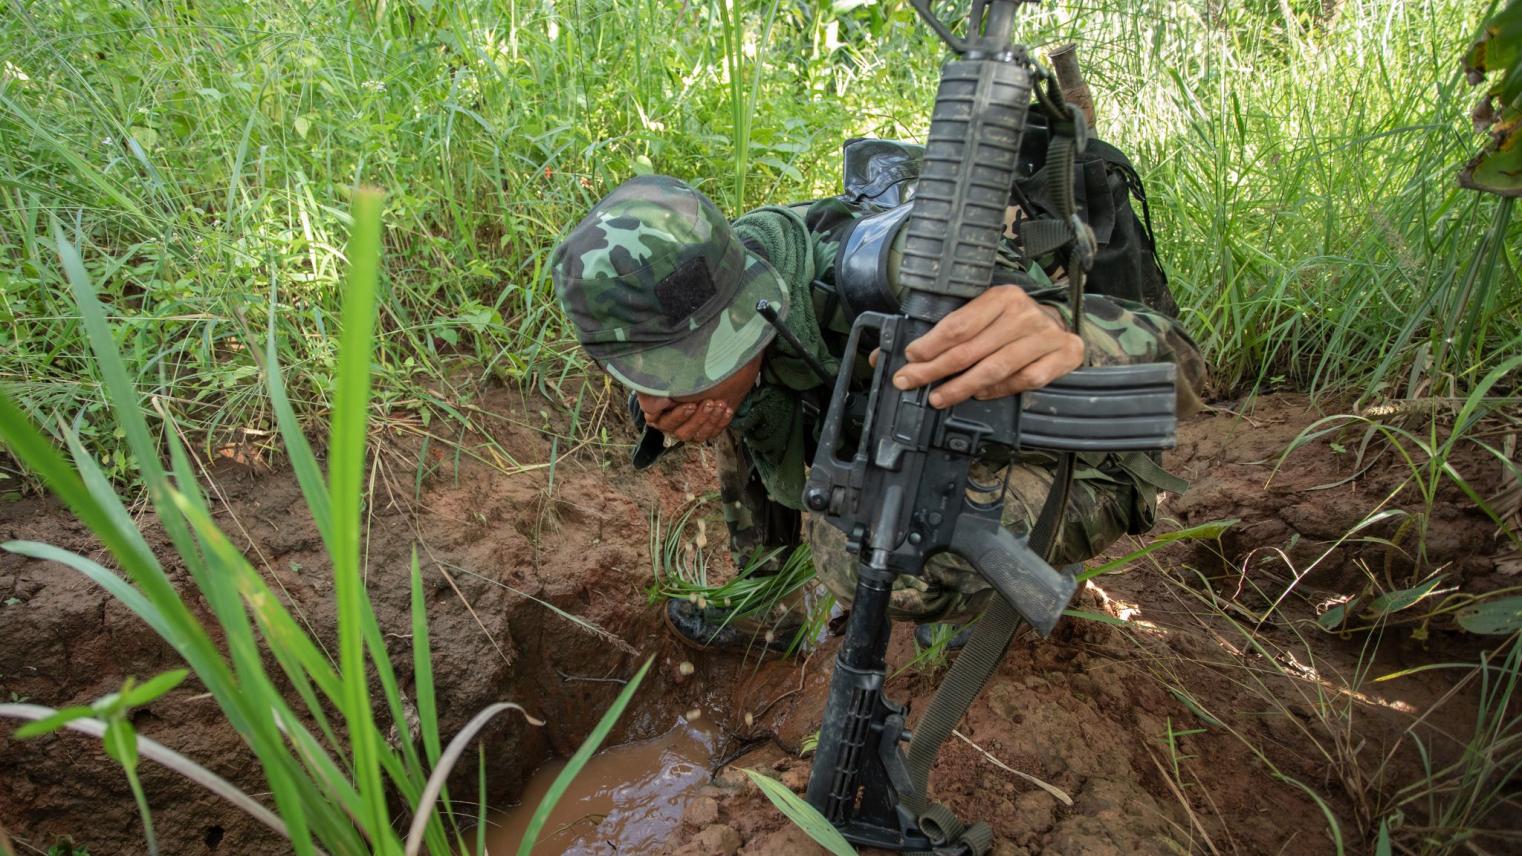 A soldier holding a gun crouching in the grass with his face obscured by his helmet